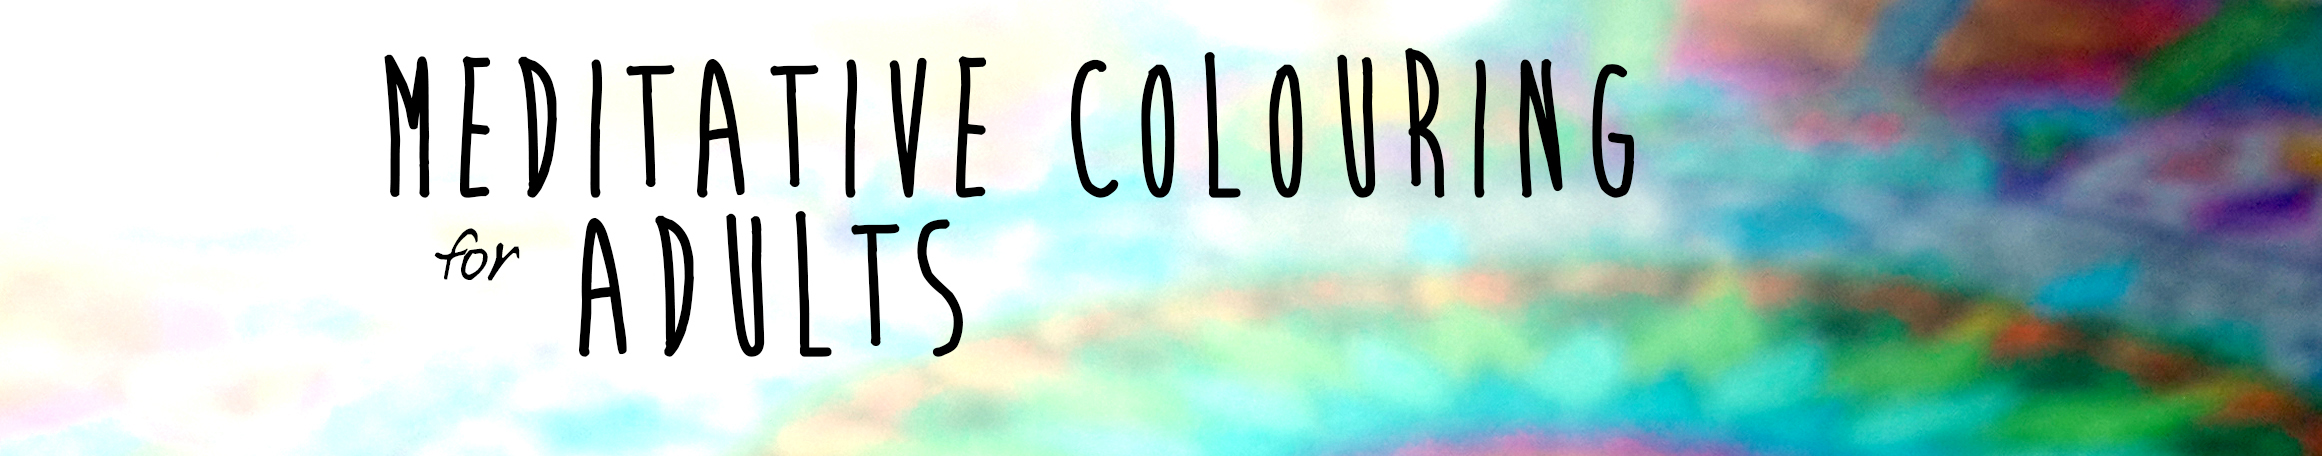 Meditative Colouring for Adults